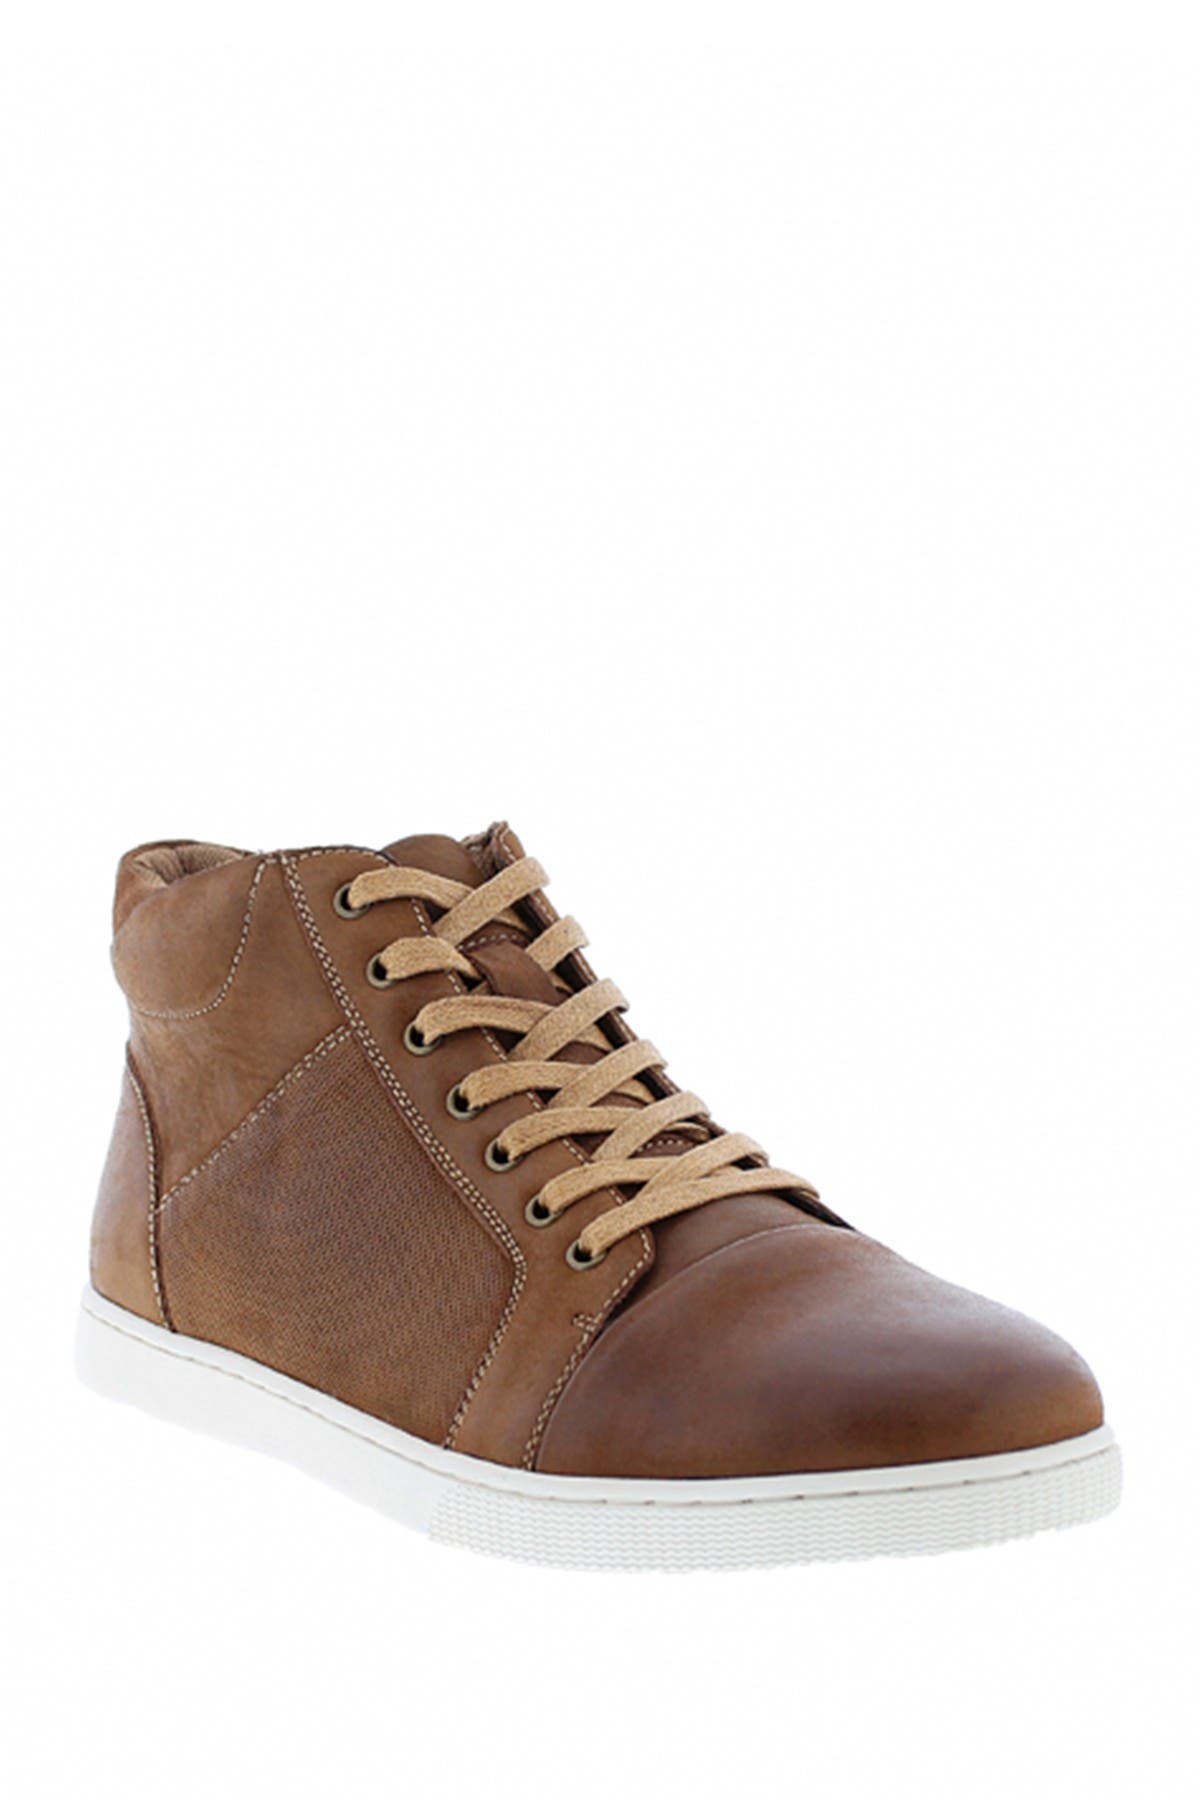 English Laundry Vail Sneaker In Cognac